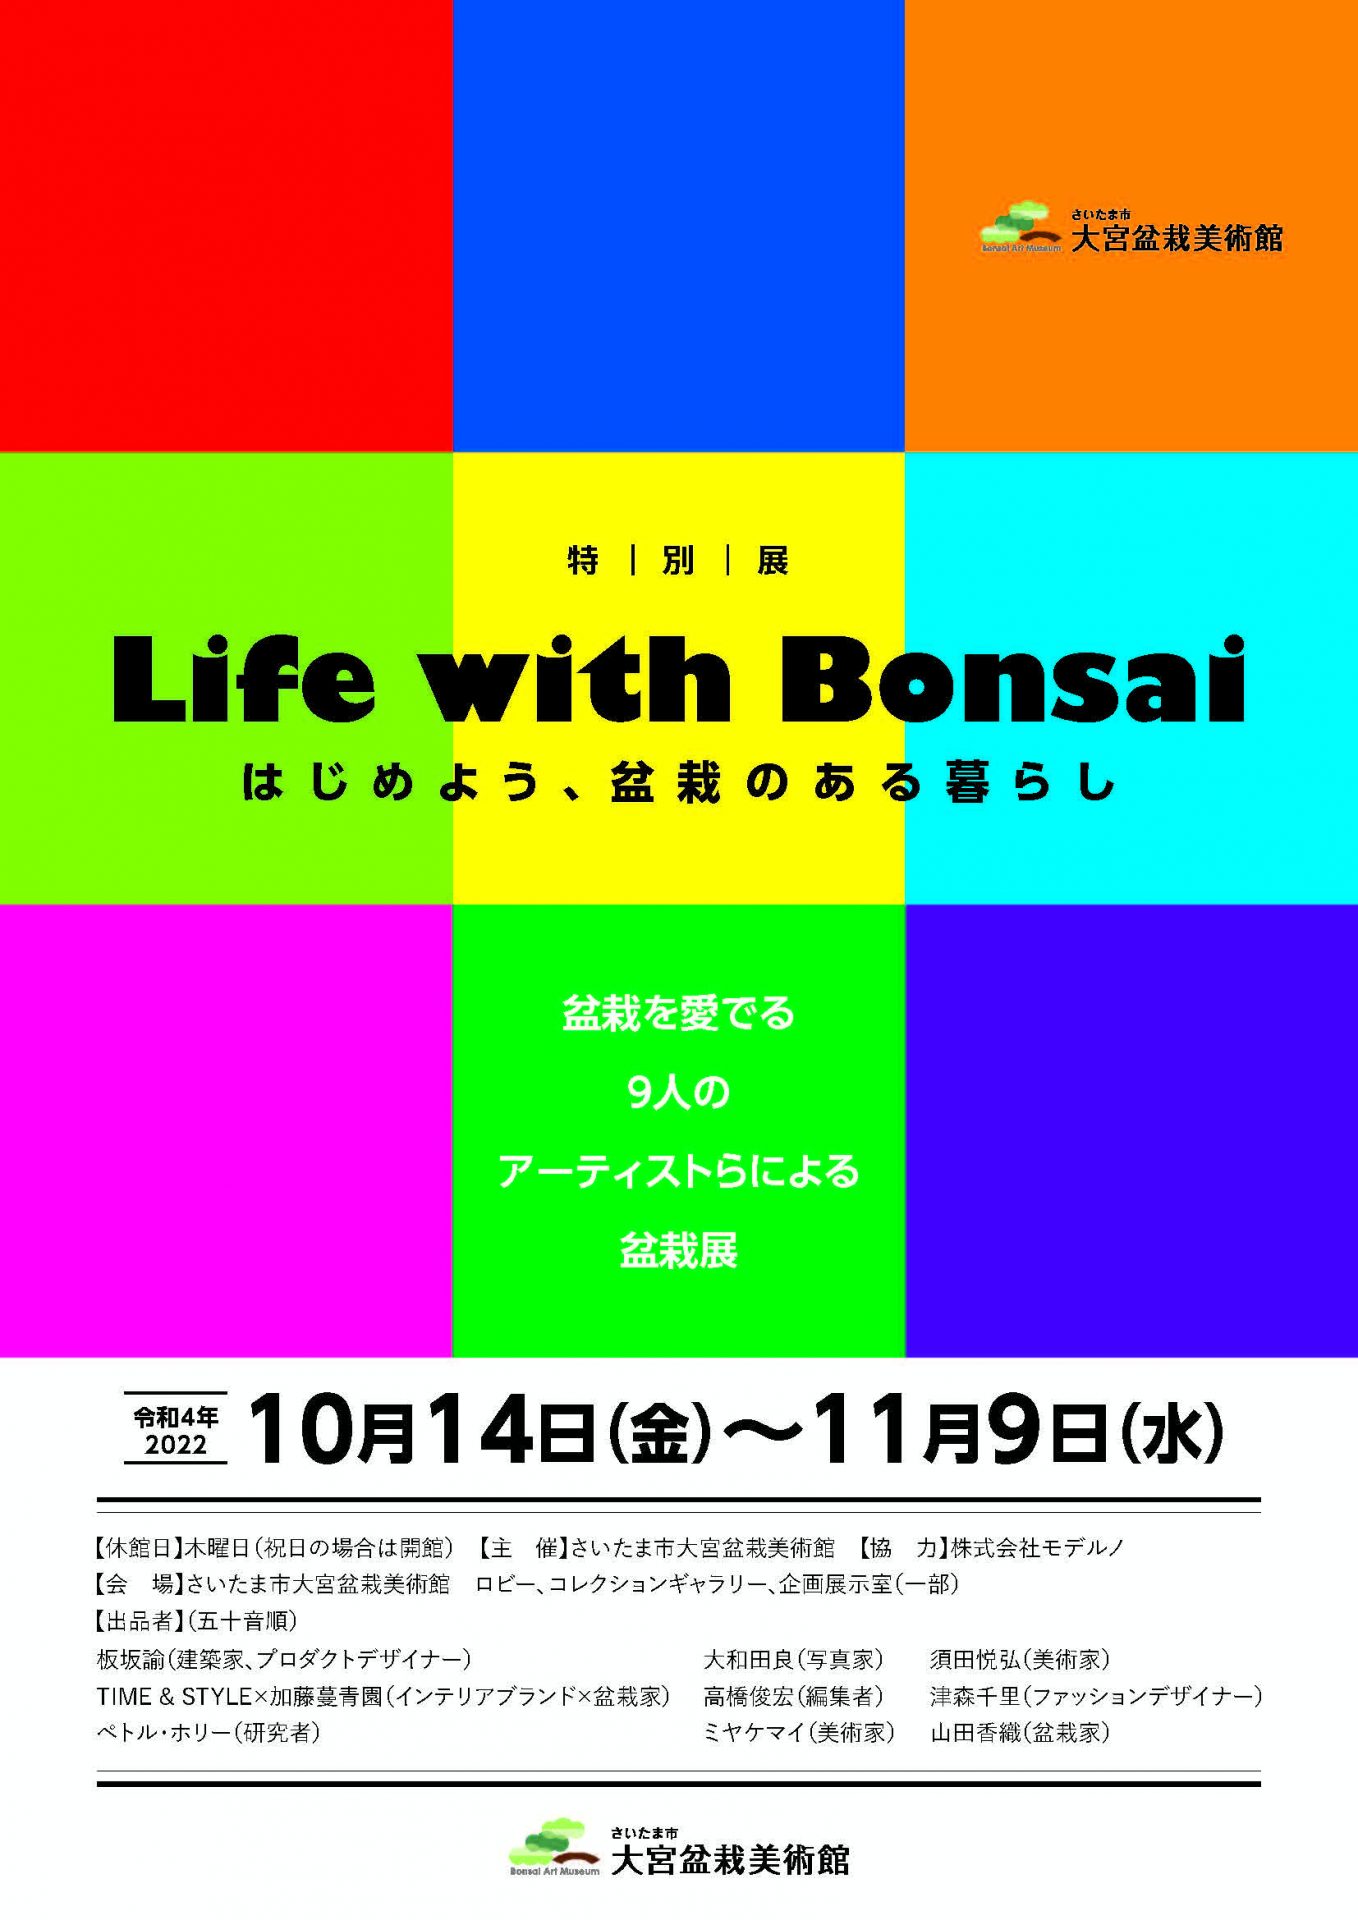 Special Exhibition: Life with Bonsai